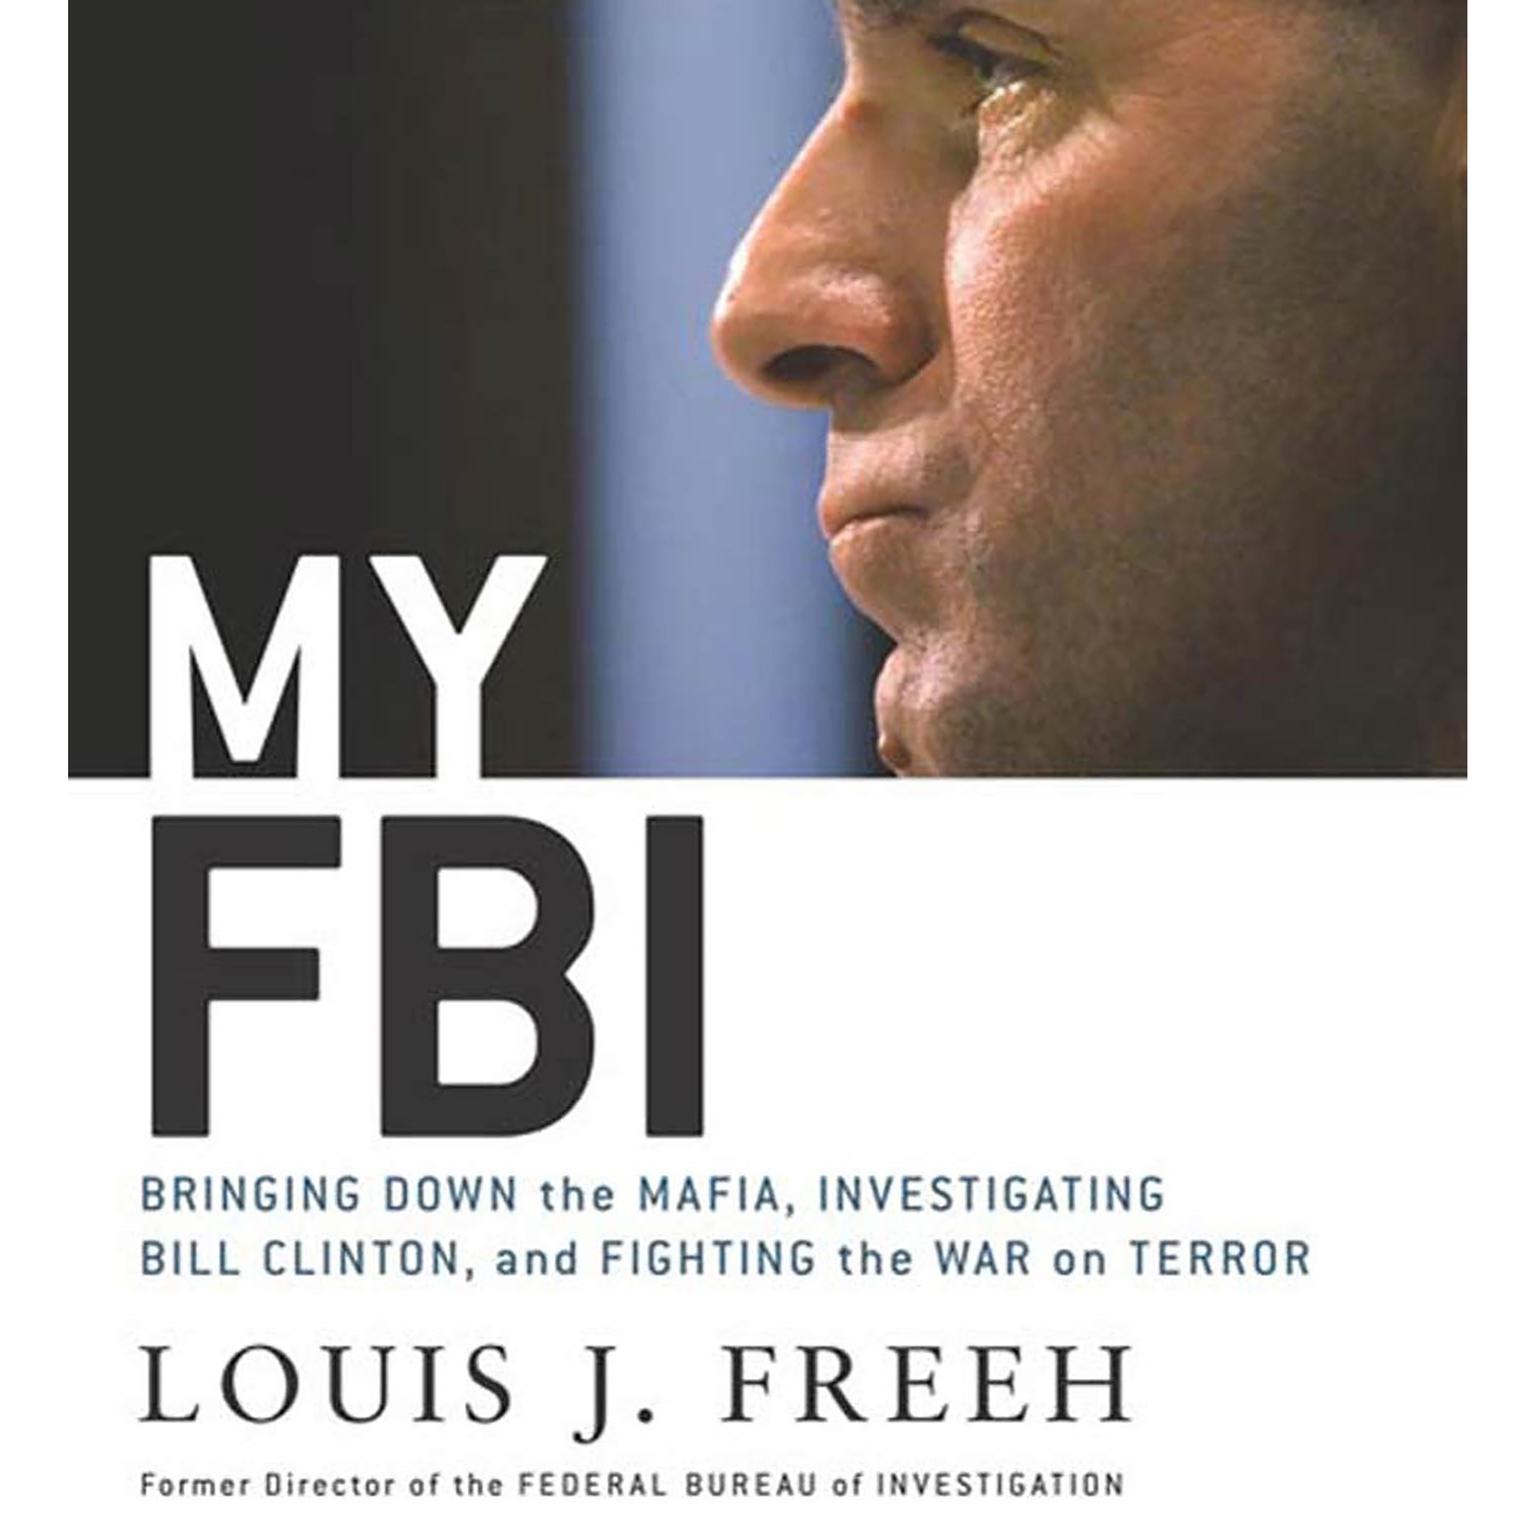 My FBI (Abridged): Bringing Down the Mafia, Investigating Bill Clinton, and Fighting the War on Terror Audiobook, by Louis J. Freeh